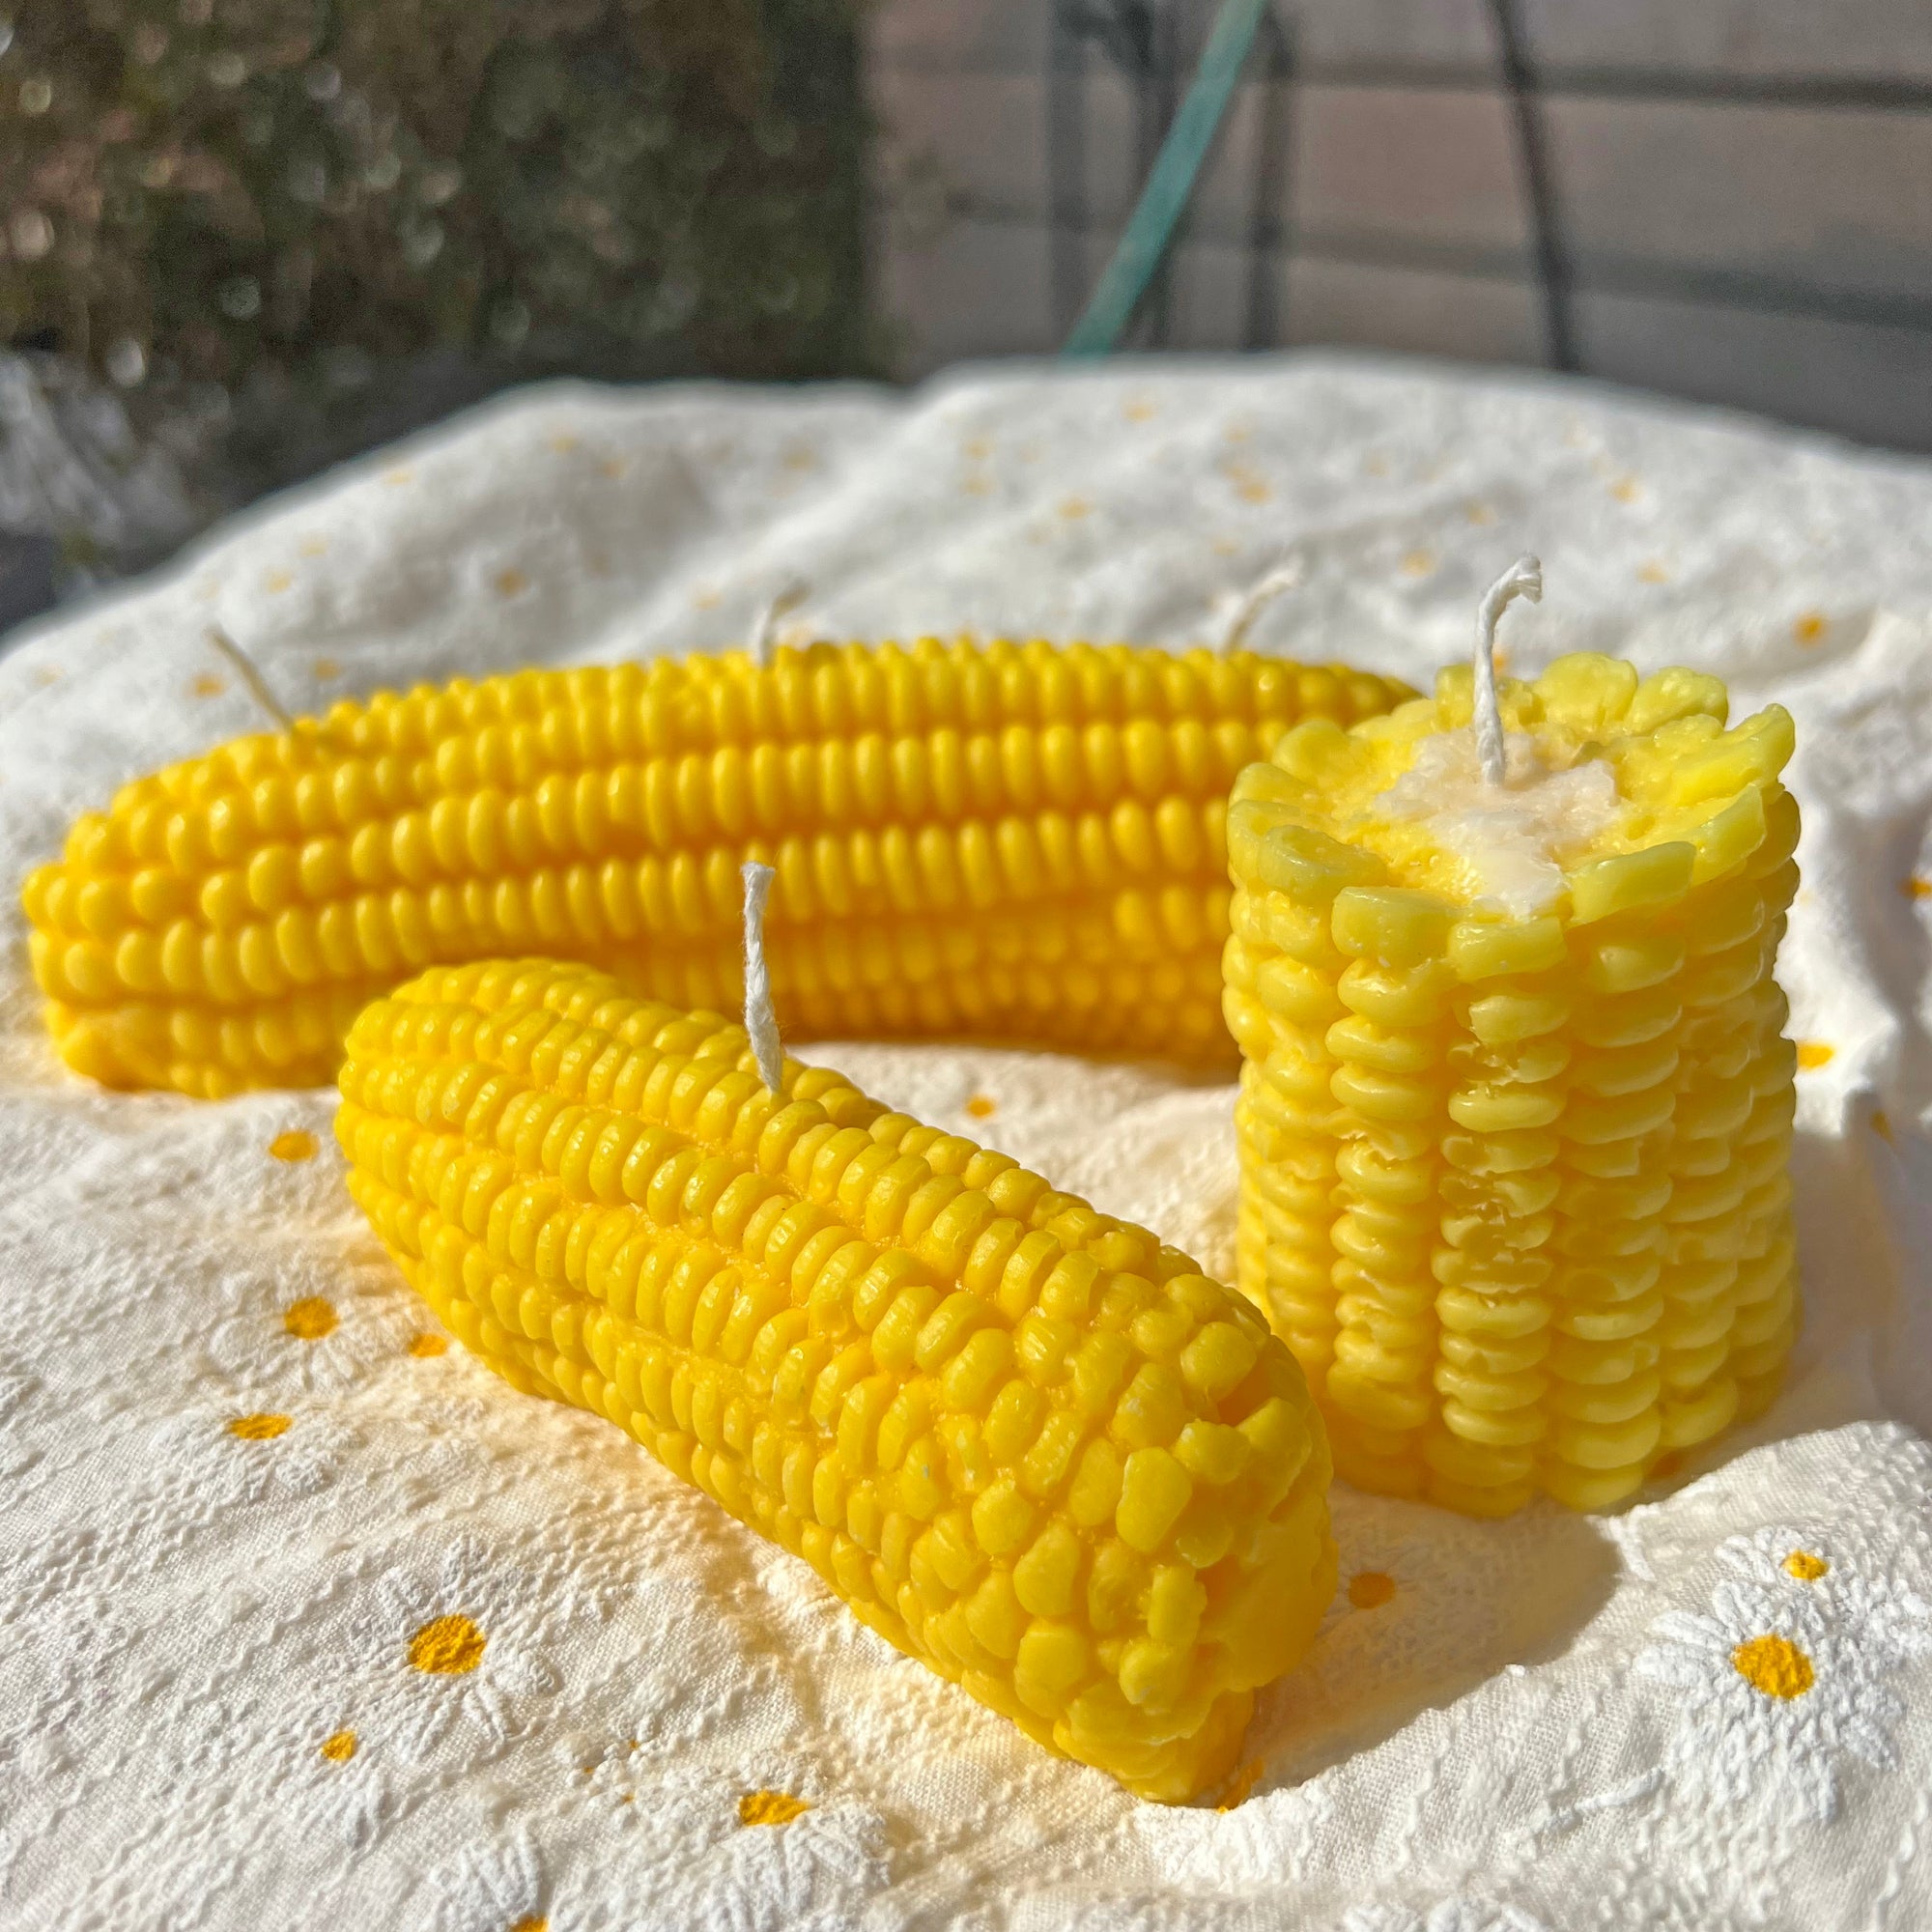 Corn shaped Candle │ Vegetable Candle │ YUIBROOKLYN